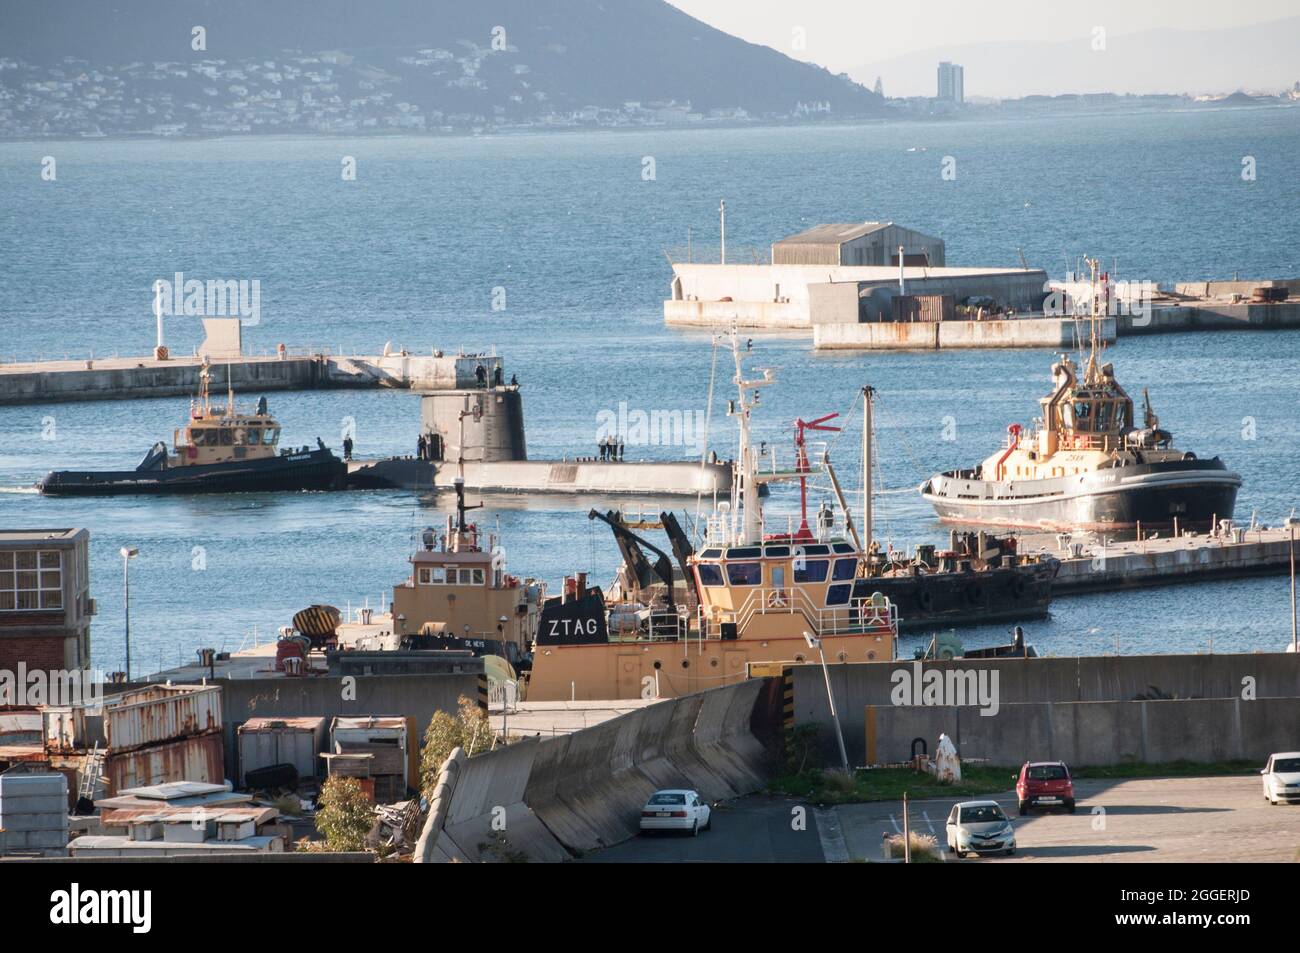 SA Navy Submarine docking with tugboats in attendance Stock Photo